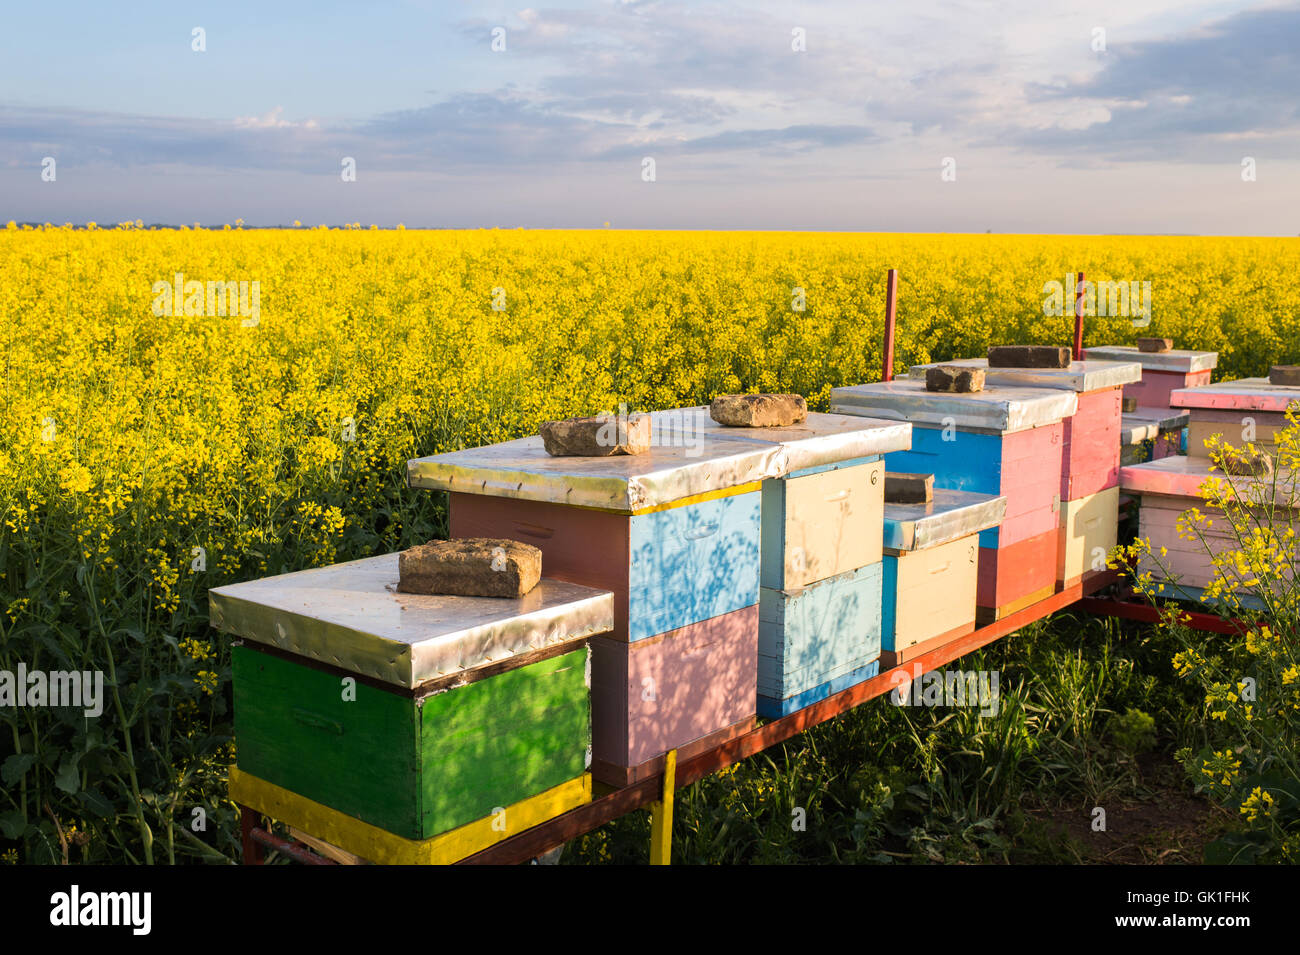 Apiary in the field of rapeseed Stock Photo